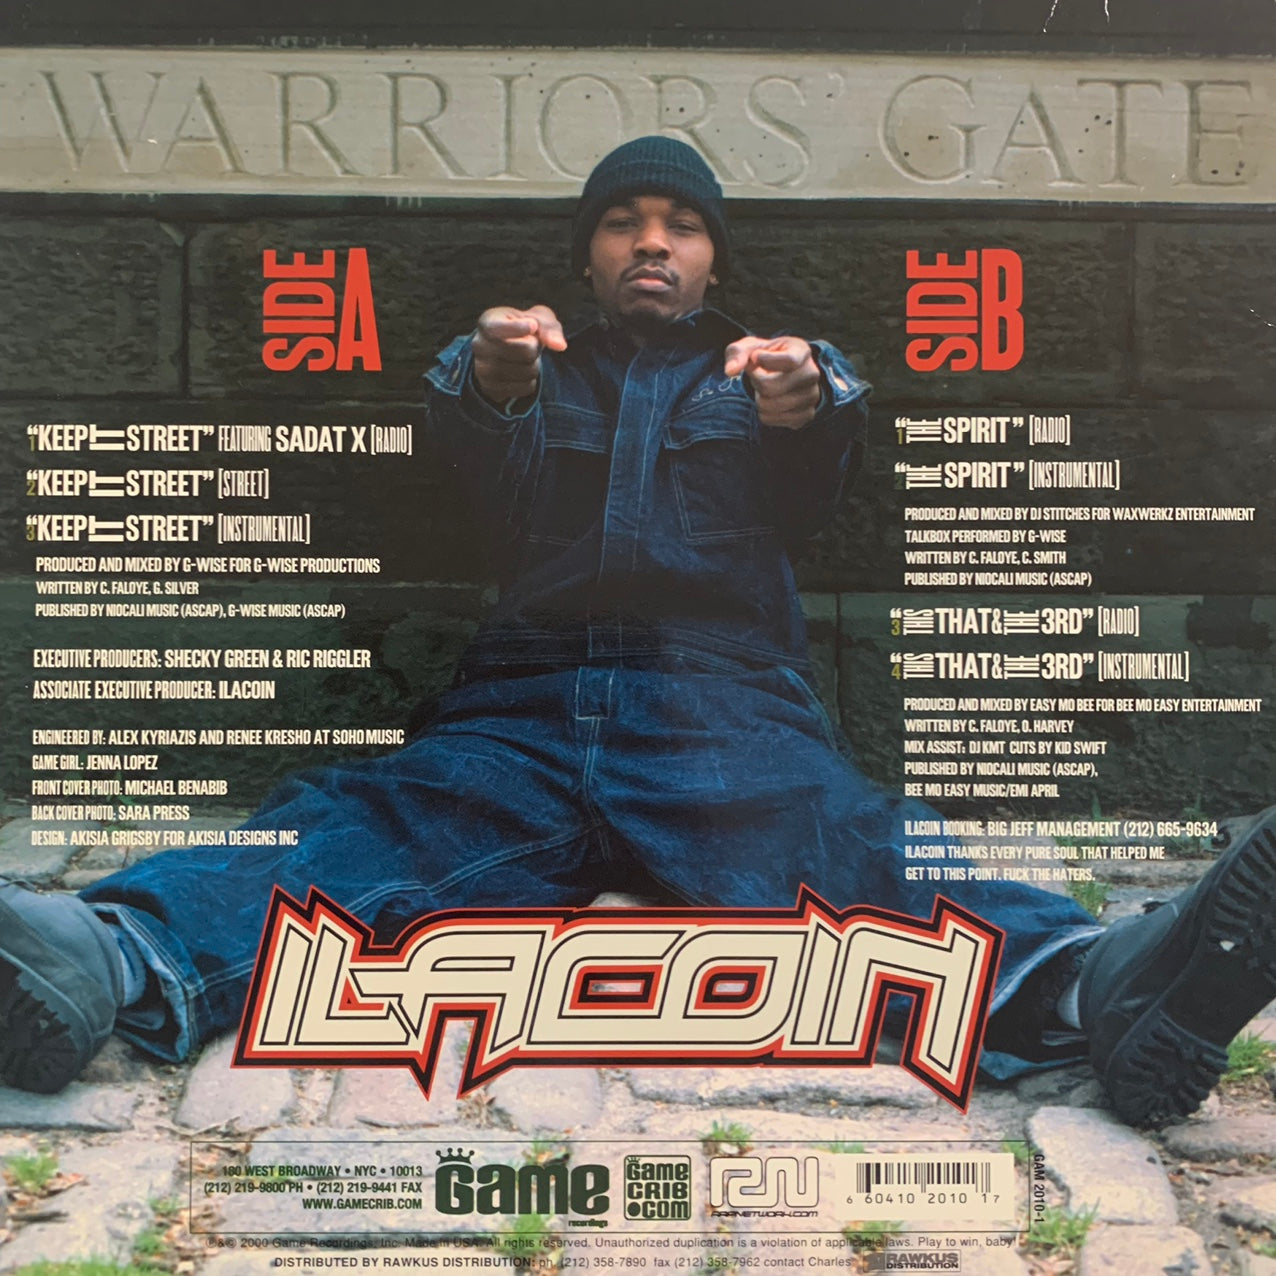 Ilacoin “Keep It Street” Feat Sadat X / “The Spirit” / “This That & The 3rd” 7 Track 12inch Vinyl